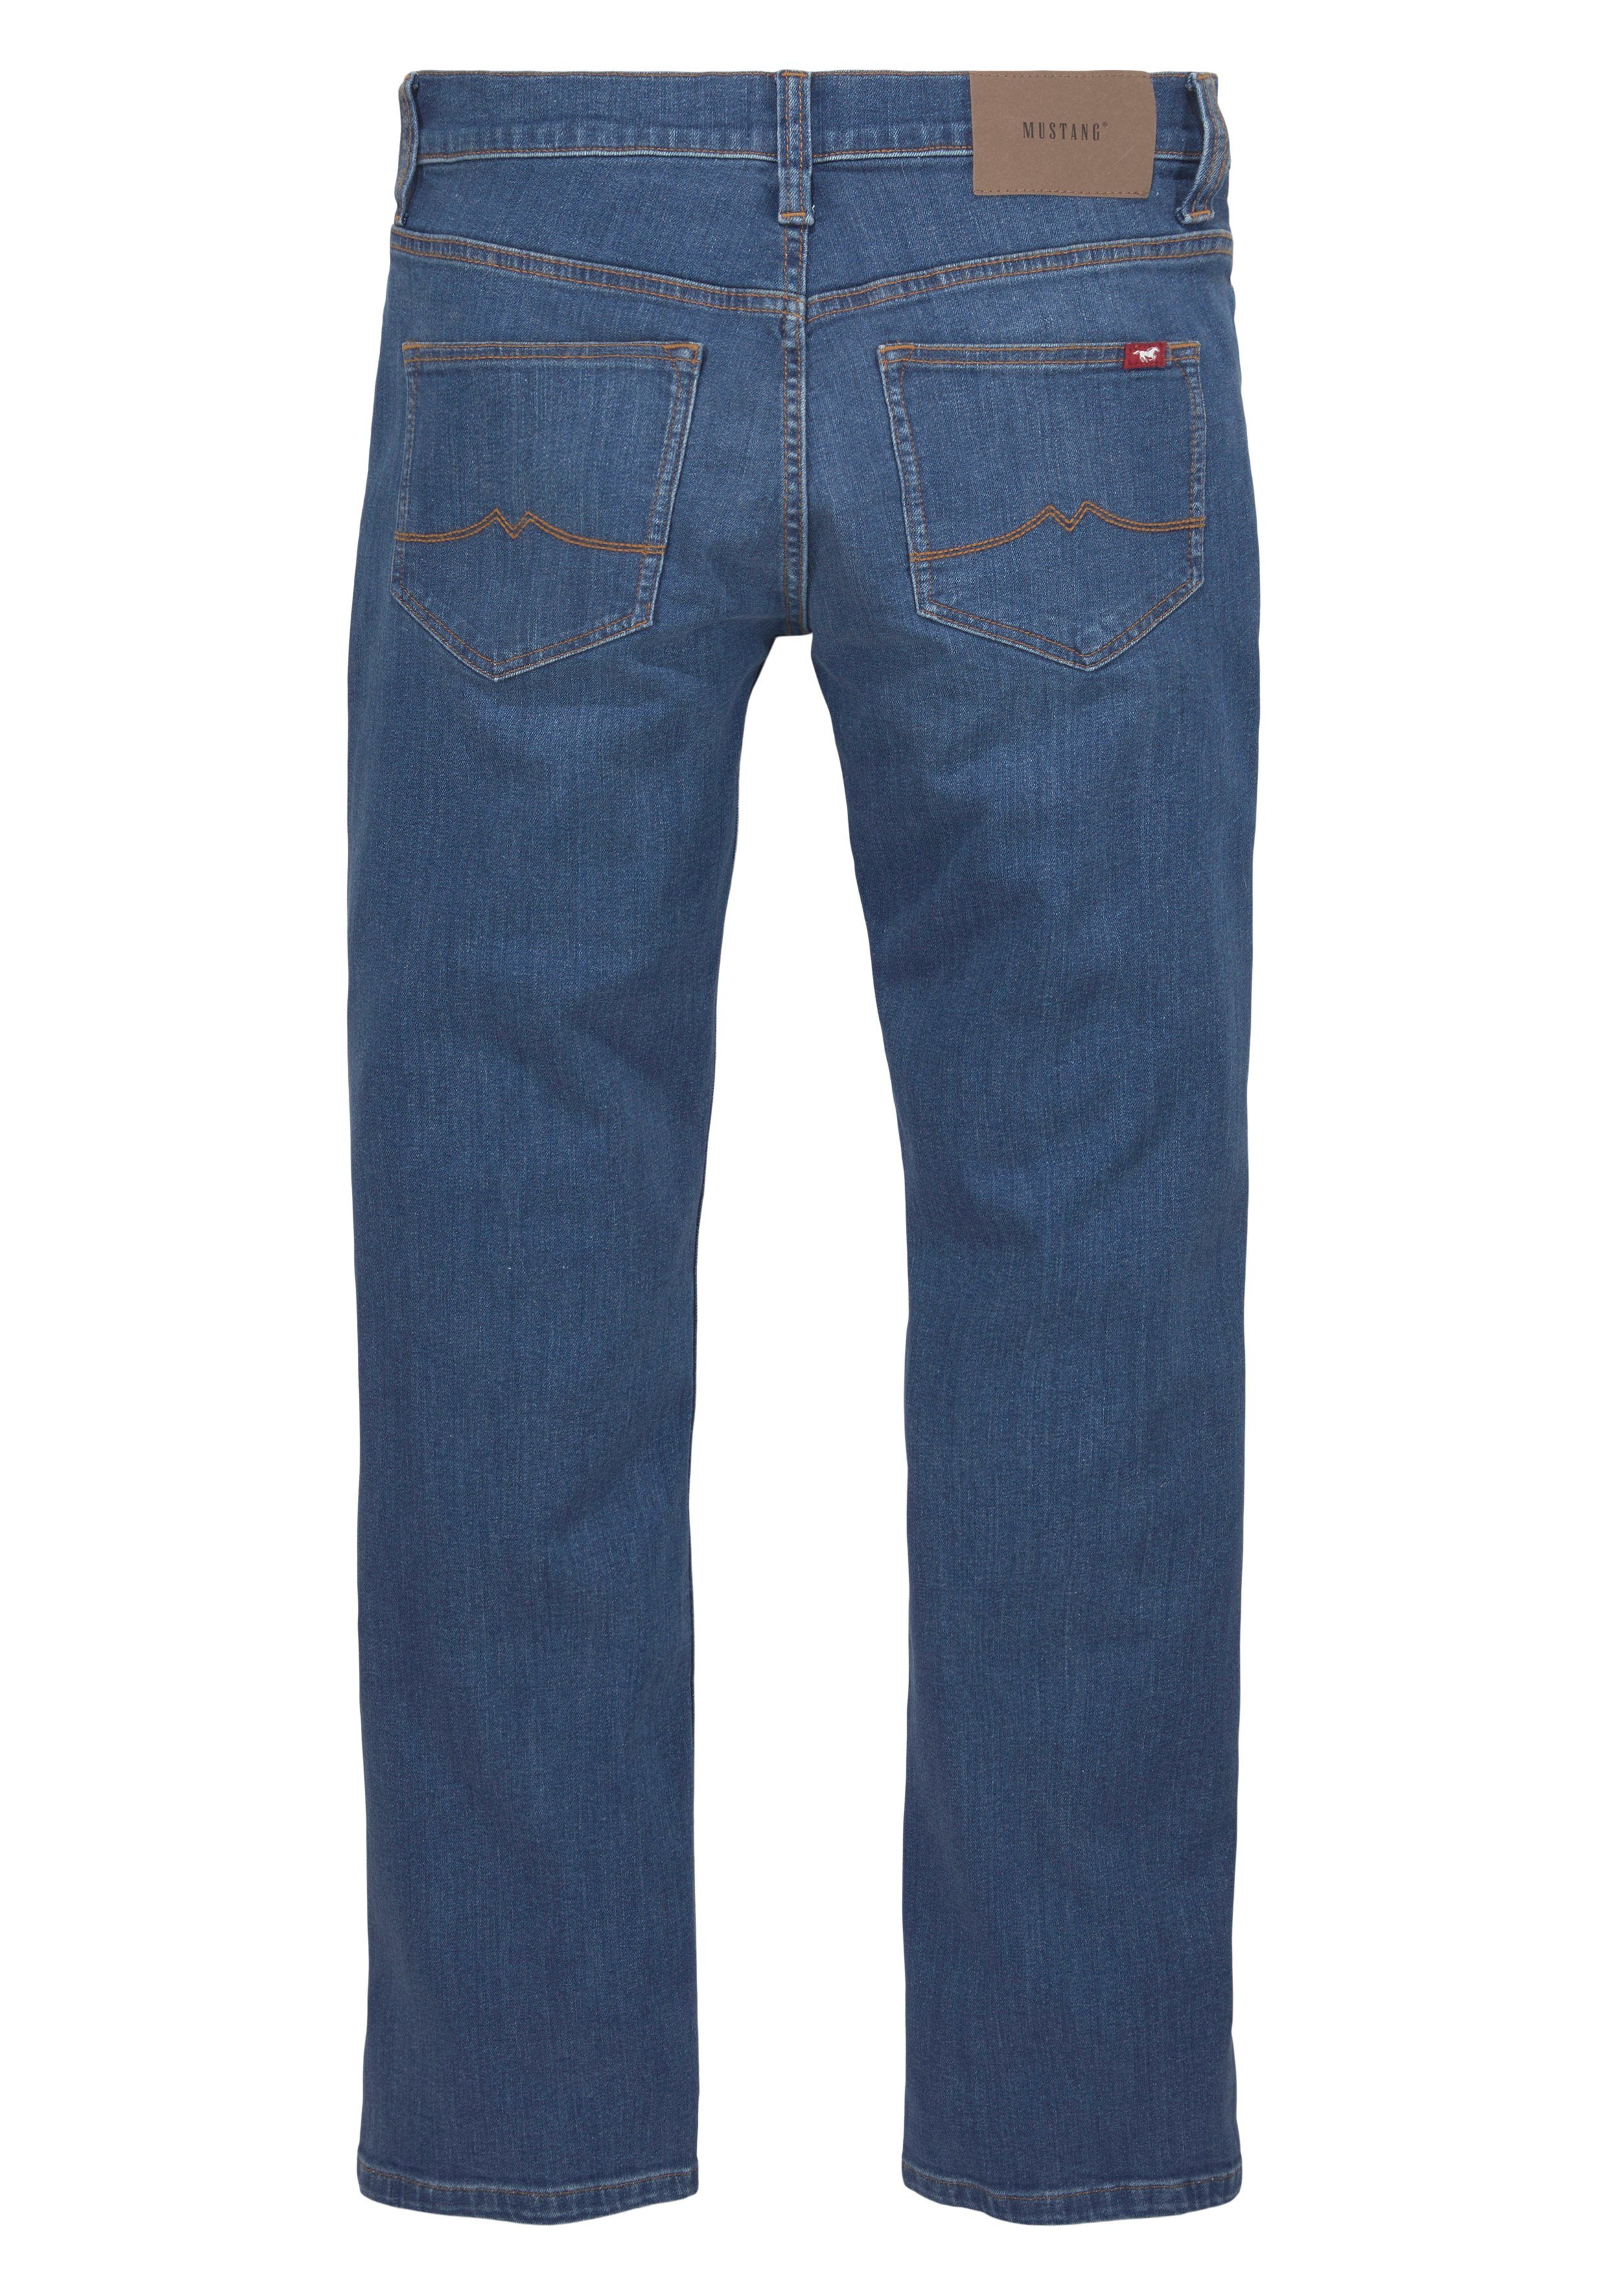 wash BOOTCUT STYLE OREGON Bootcut-Jeans dark MUSTANG blue